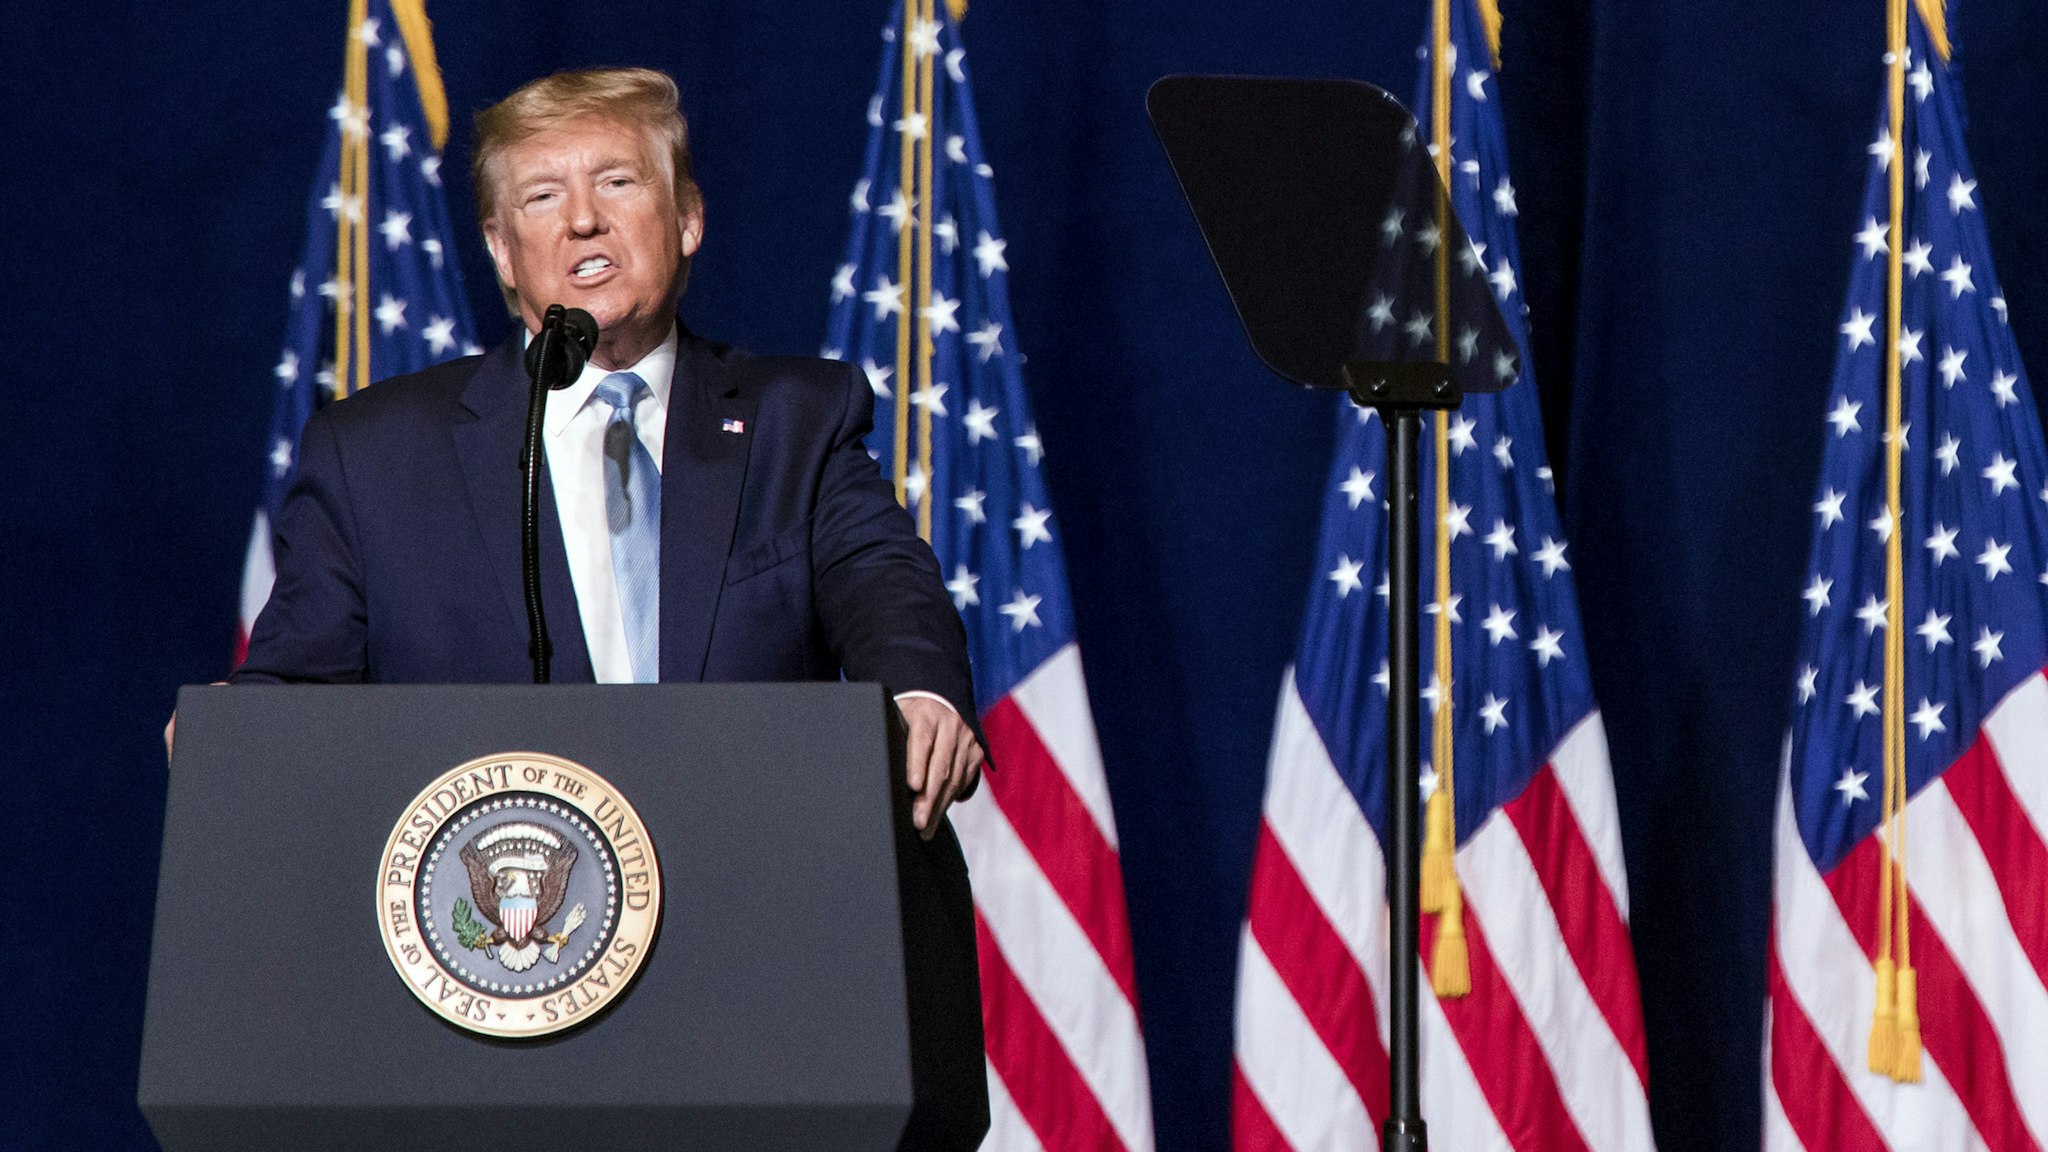 MIAMI, FL - JANUARY, 3: President Donald Trump addresses the crowd at the King Jesus International Ministry during a "Evangelicals for Trump" rally in Miami, FL on Friday, Jan. 3, 2020.